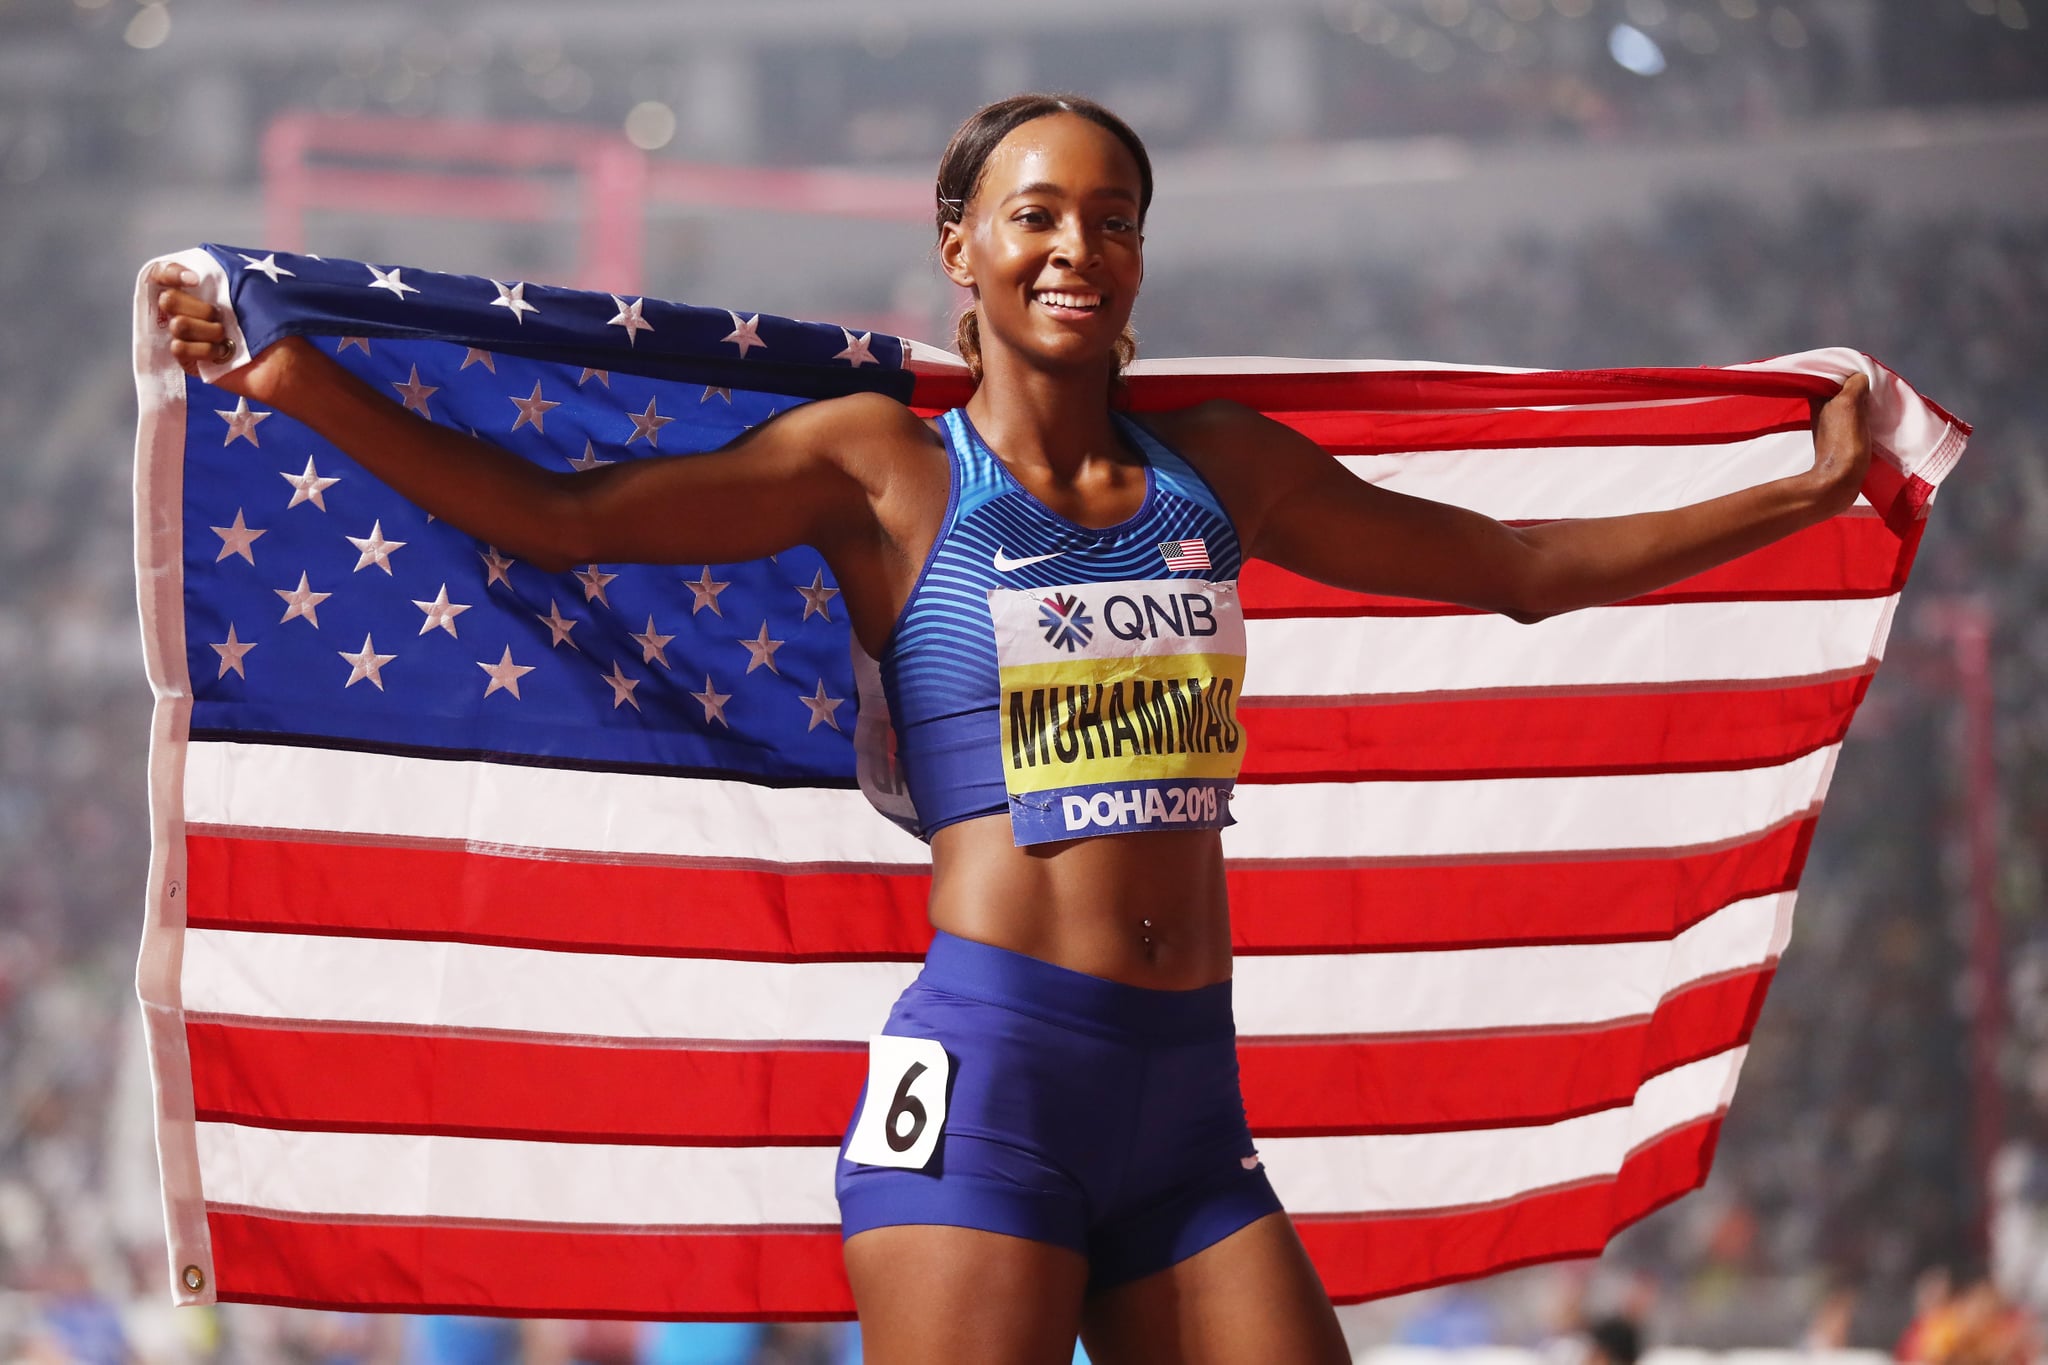 21 Female Athletes We Hope to Watch at the Tokyo Olympics